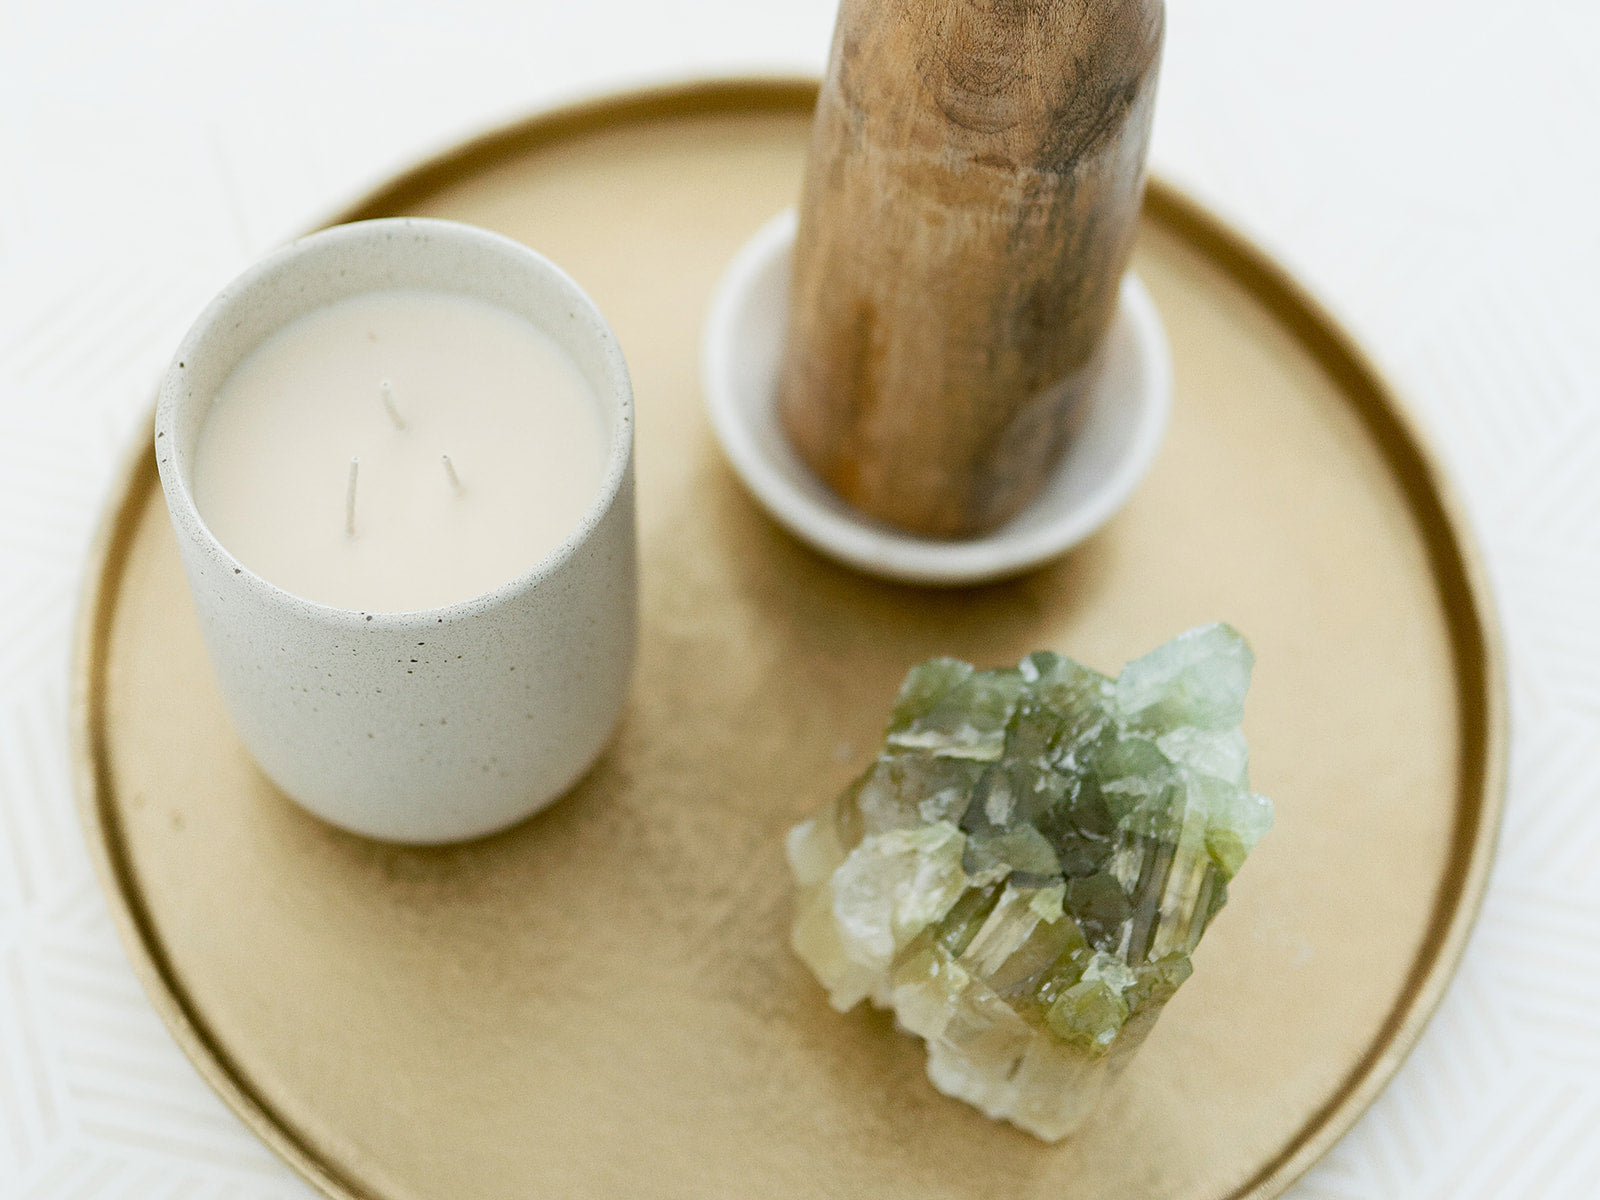 Curio Collective has a large collection of candles and crystals to personalize your space.